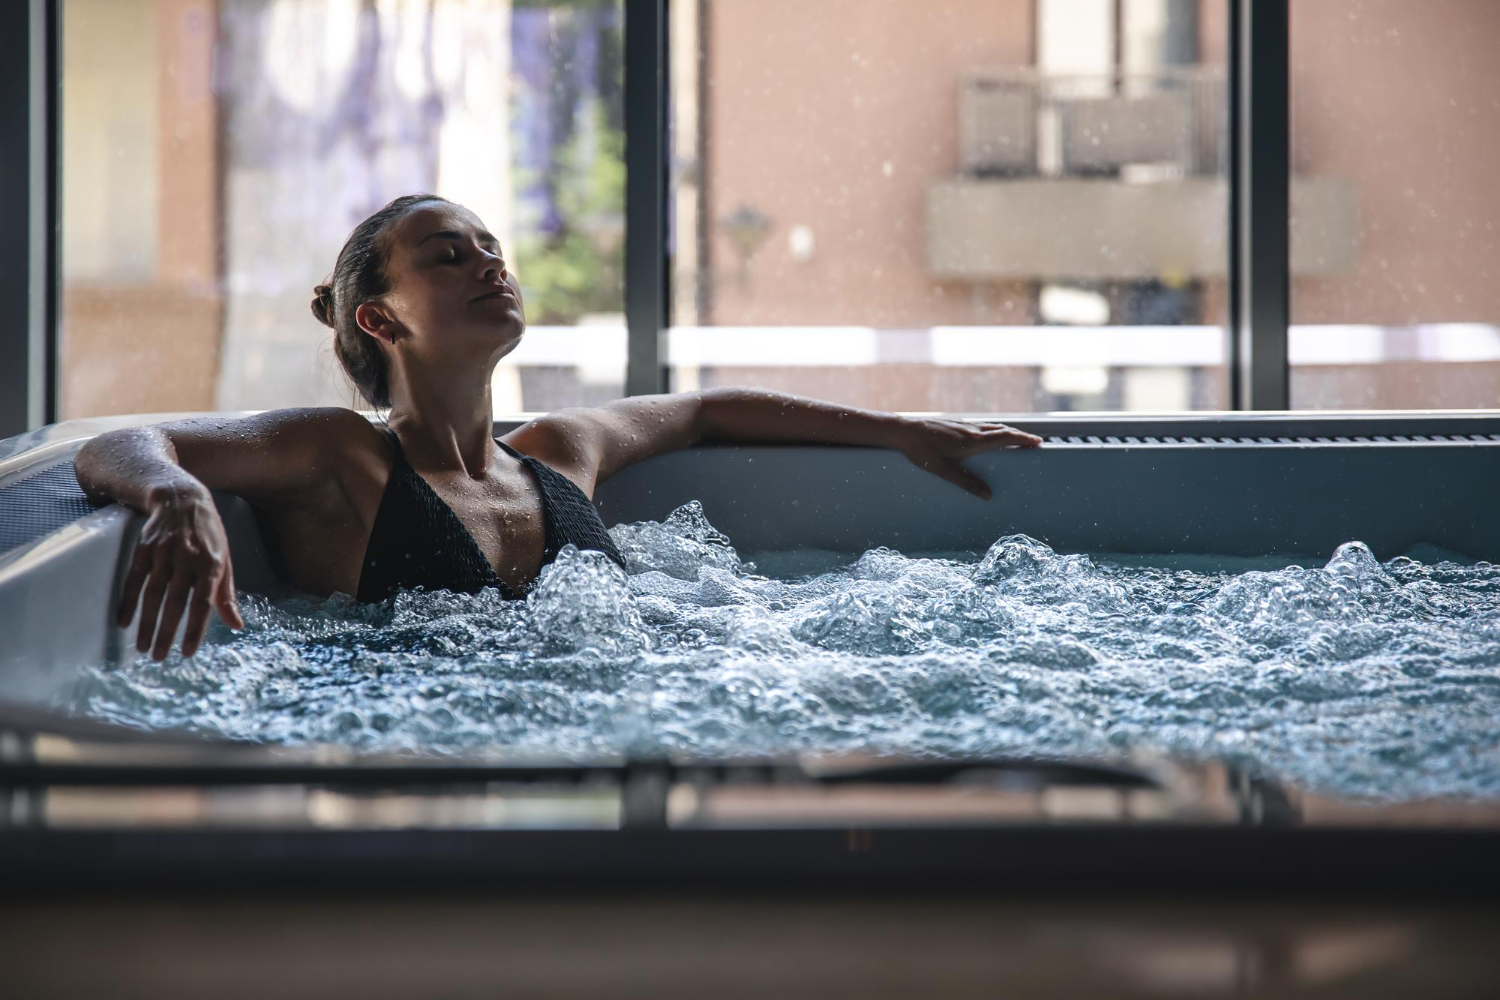 What Makes Immersion Baths the Ultimate Stress Reliever?